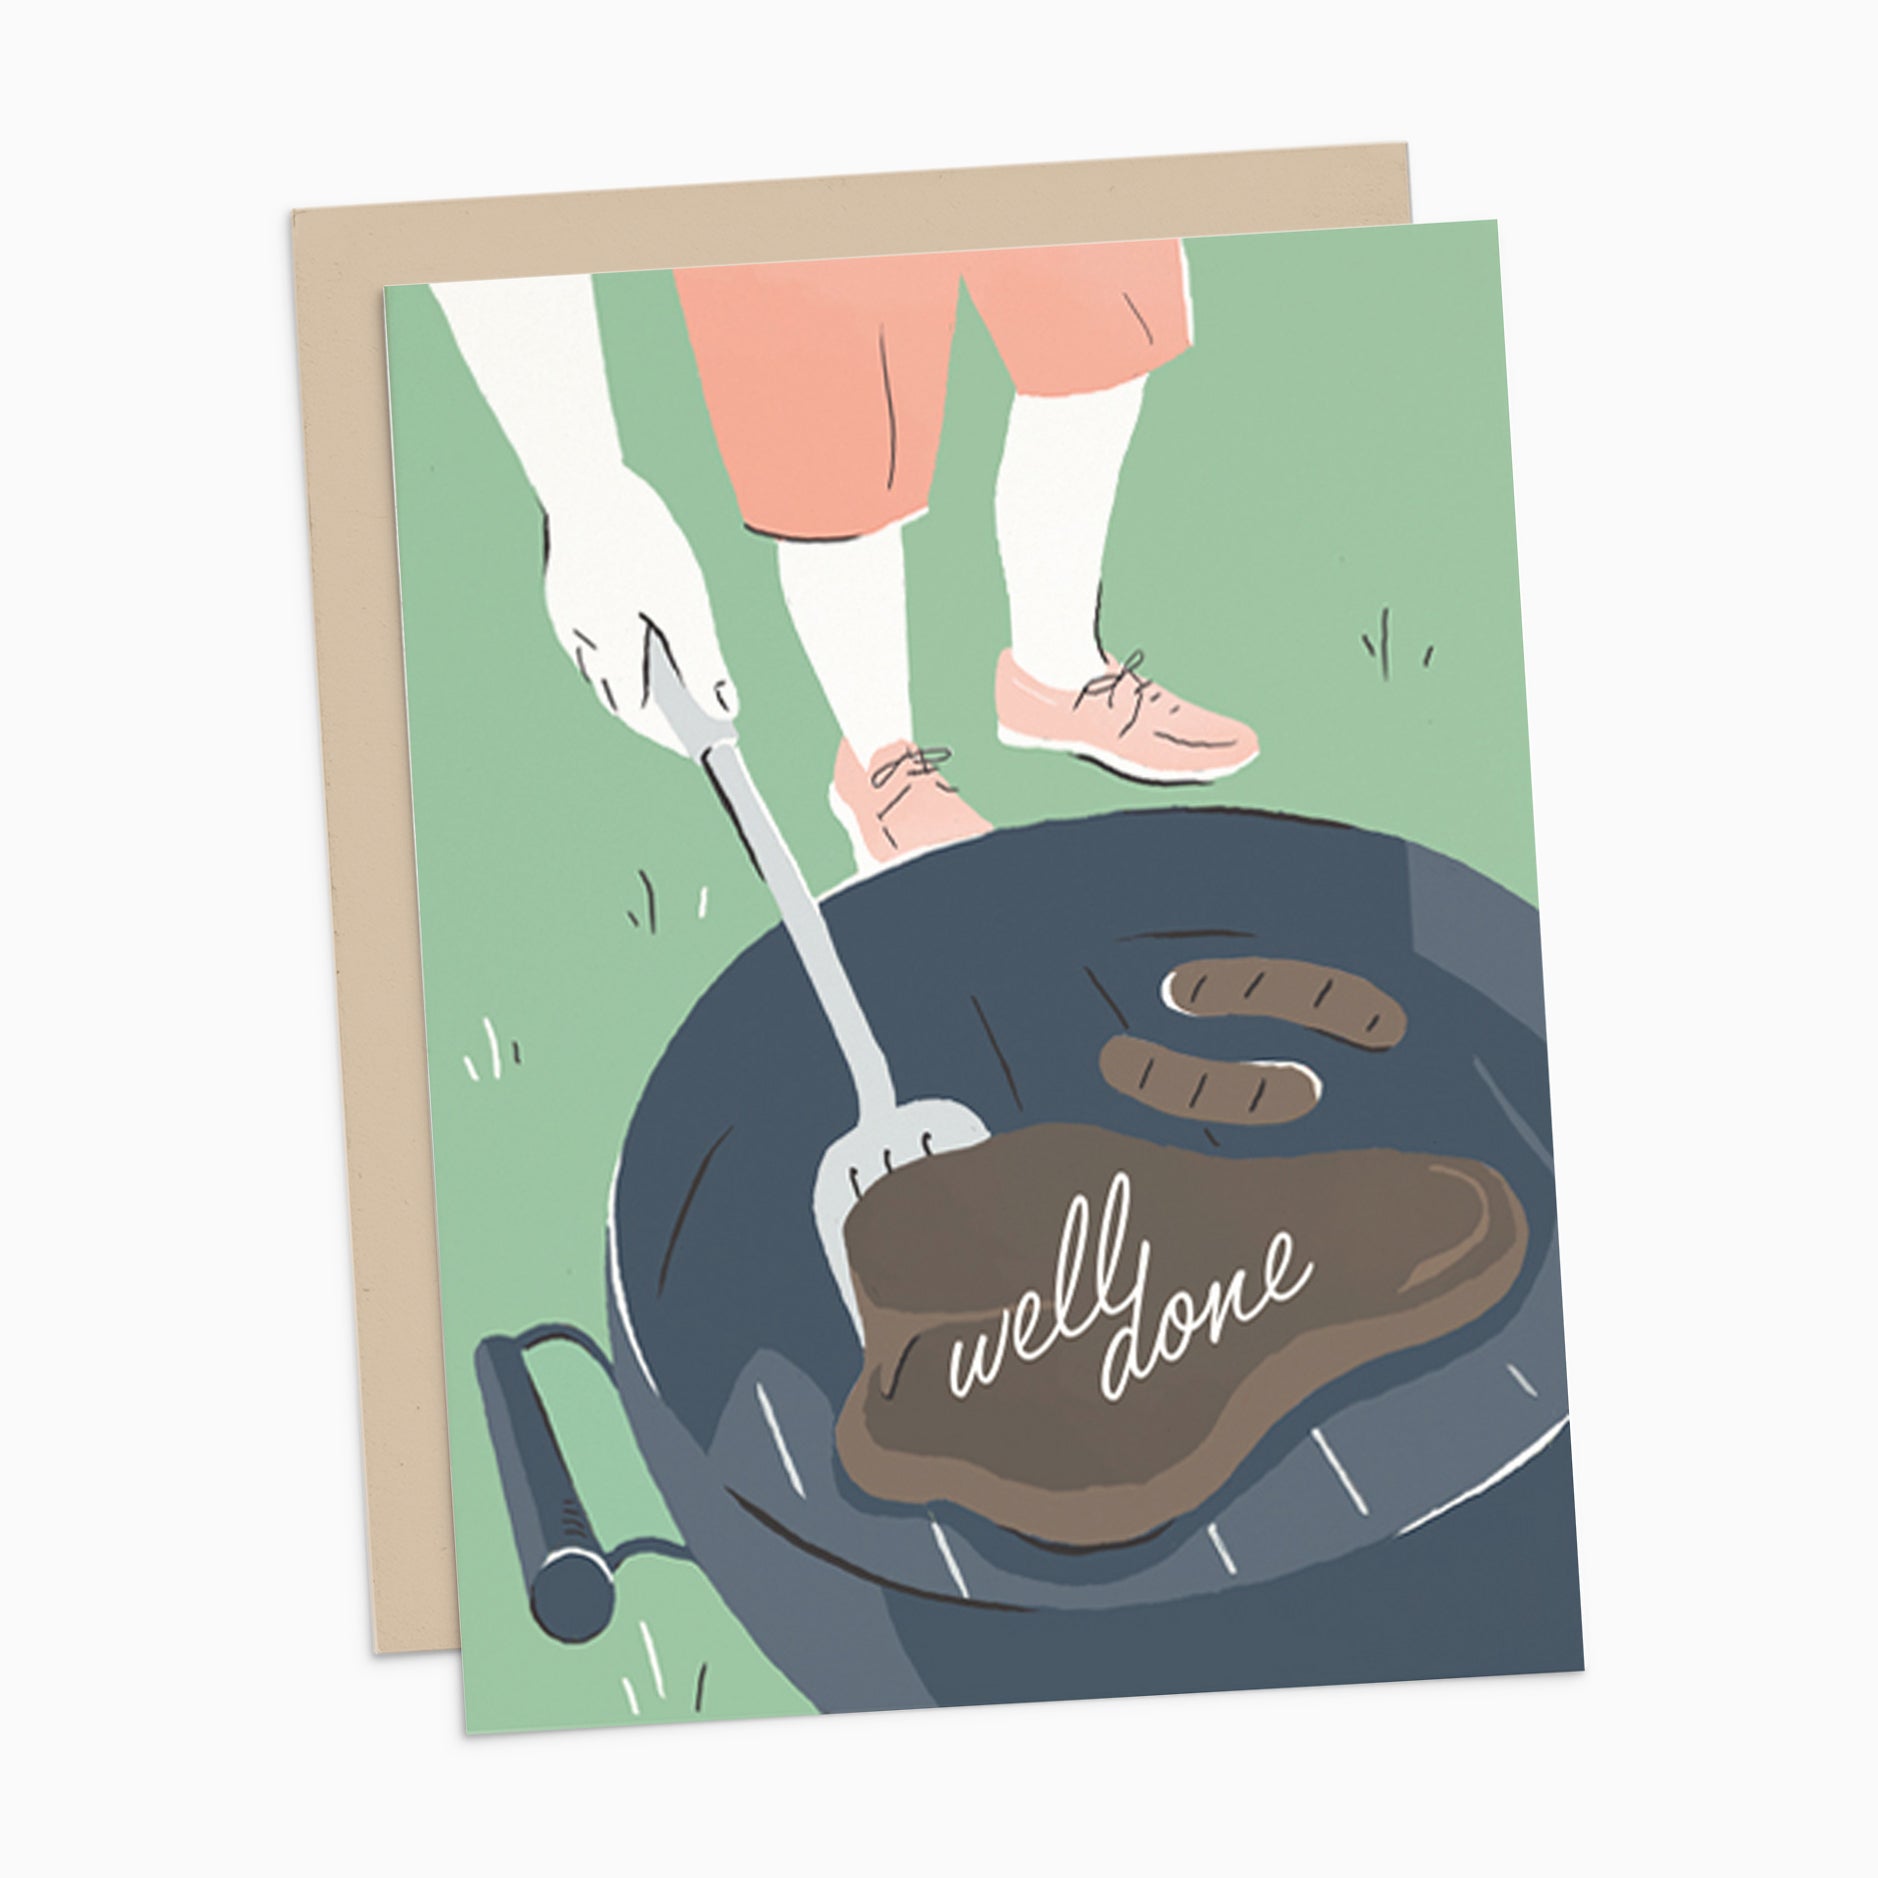 Illustrated 'Well Done' BBQ greeting card on a neutral background, featuring a whimsical steak with the words 'Well Done' written on it, sizzling on a grill.